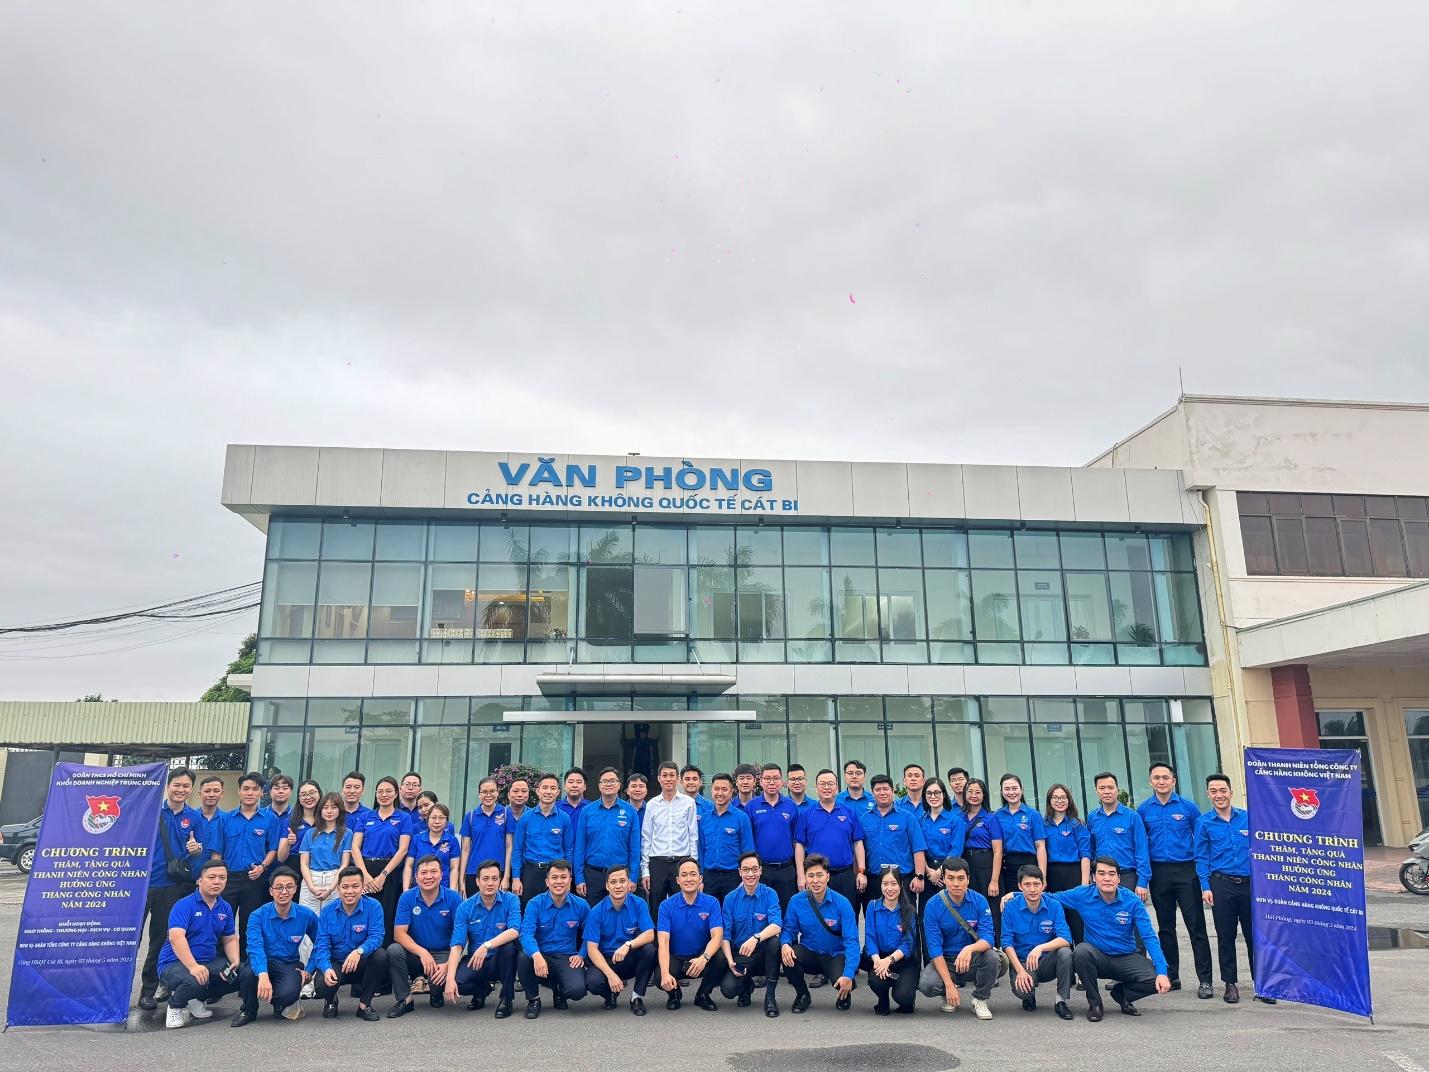 A group of people in blue shirts posing for a photoDescription automatically generated